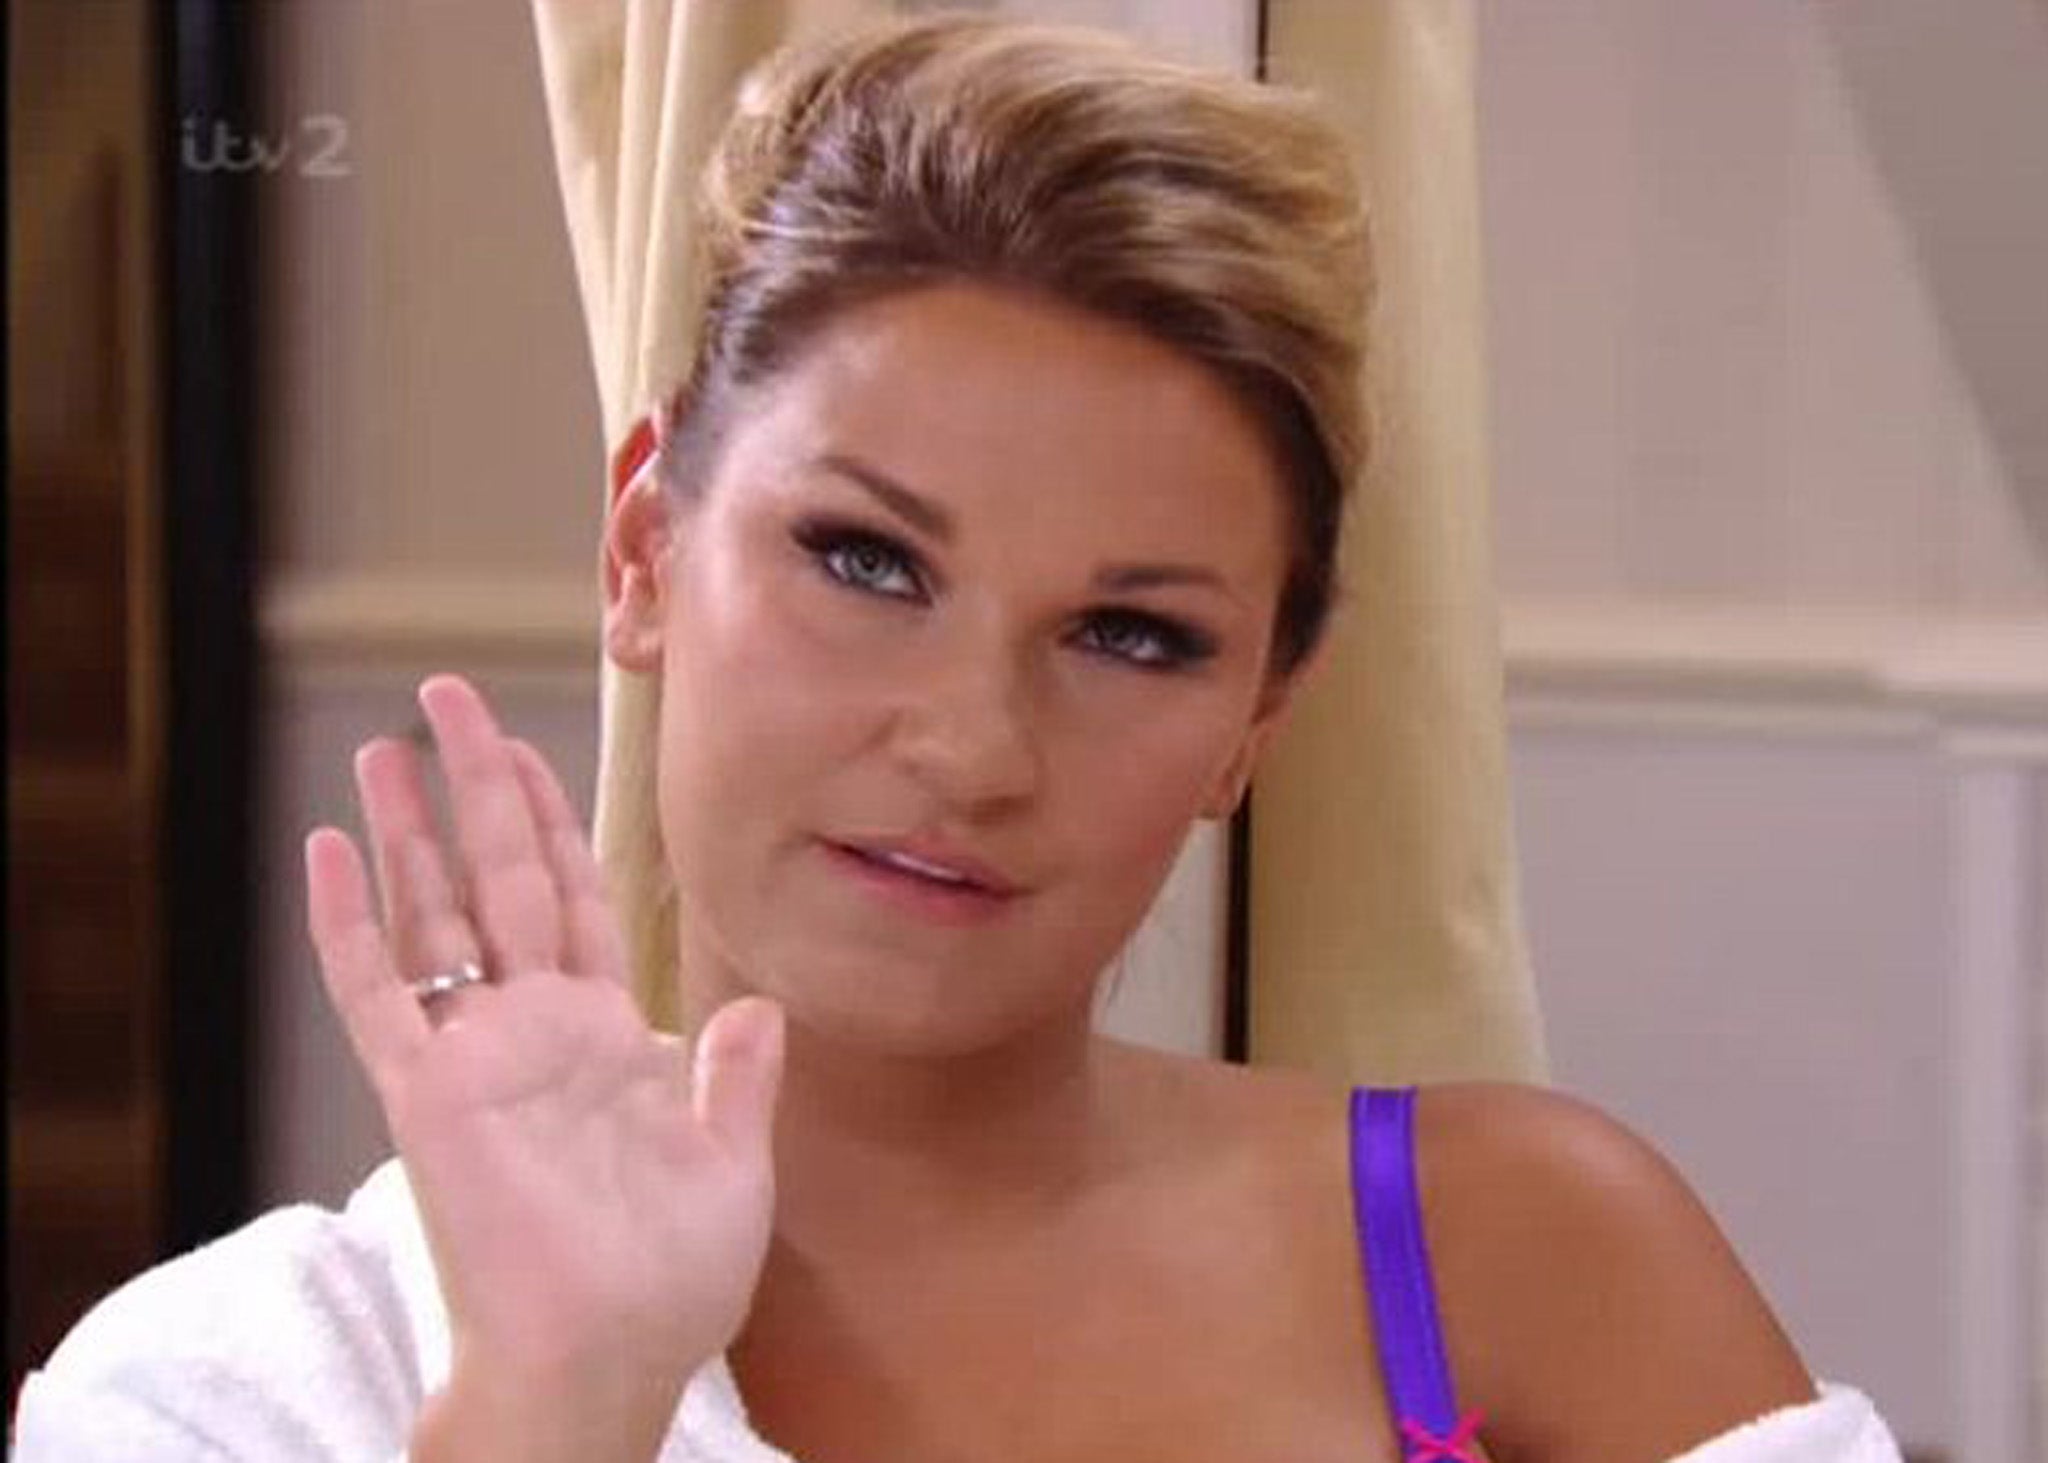 Sam Faiers has been criticised by domestic abuse charity ManKind for suggesting 'everyone slaps their boyfriend when they deserve it'